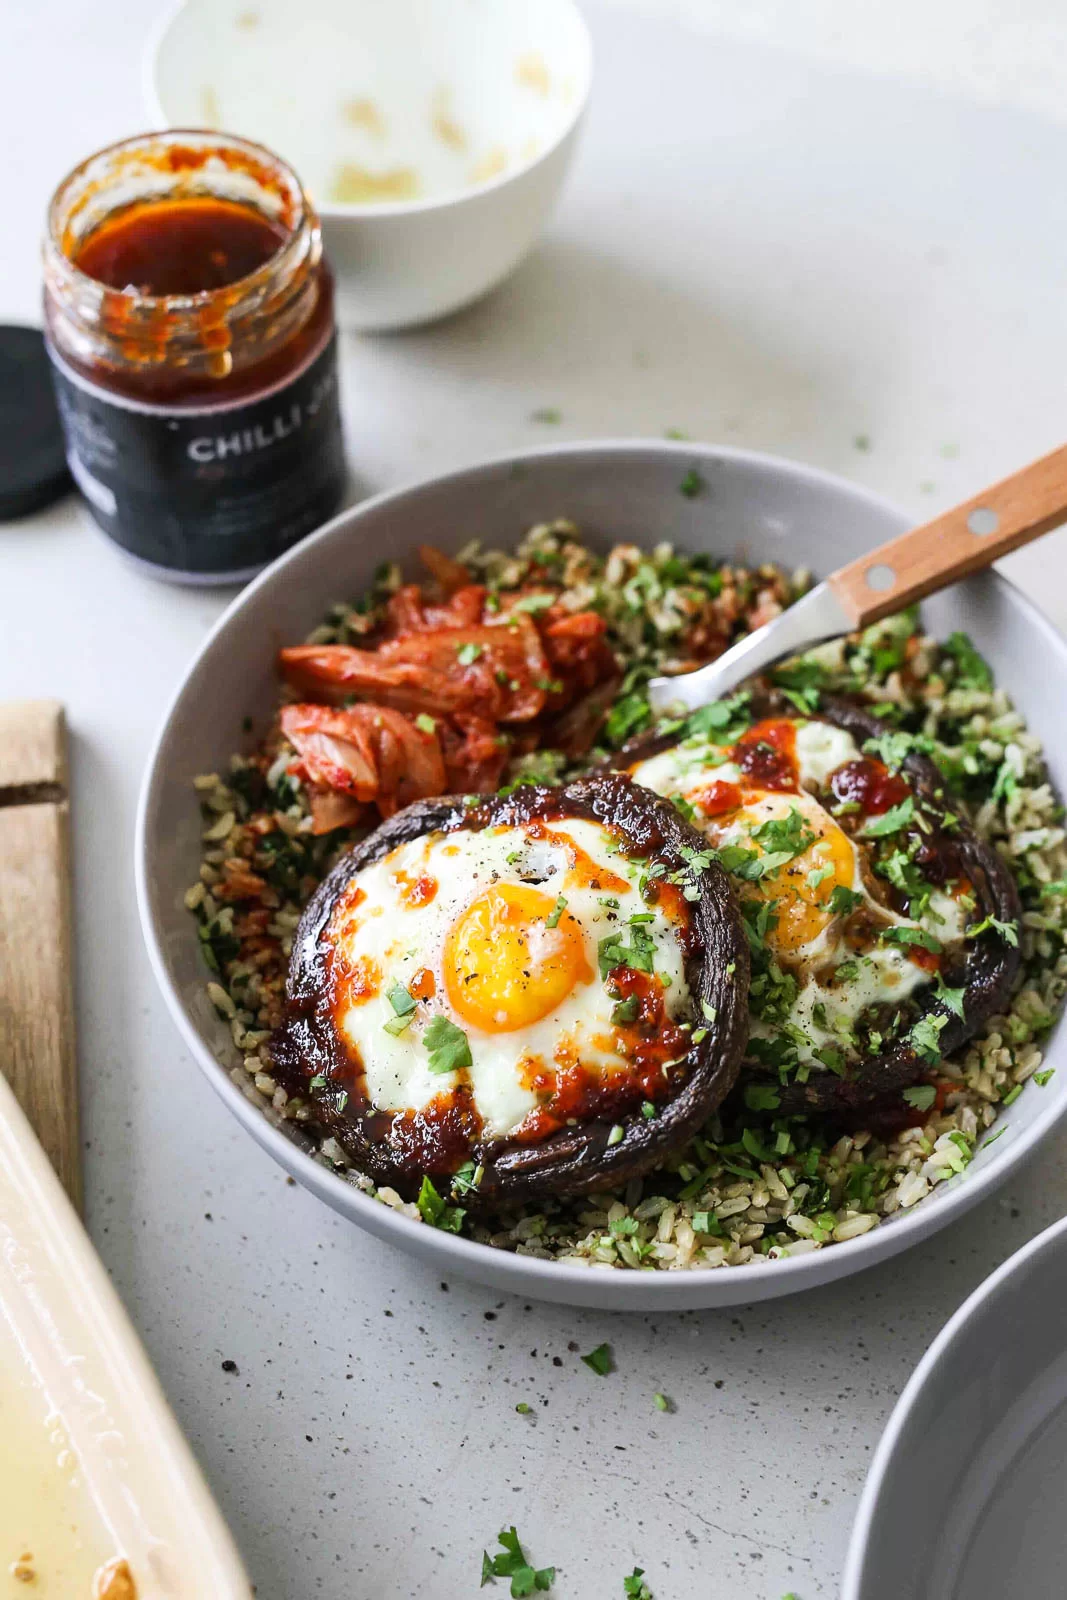 Baked eggs in mushrooms with spinach rice and kimchi